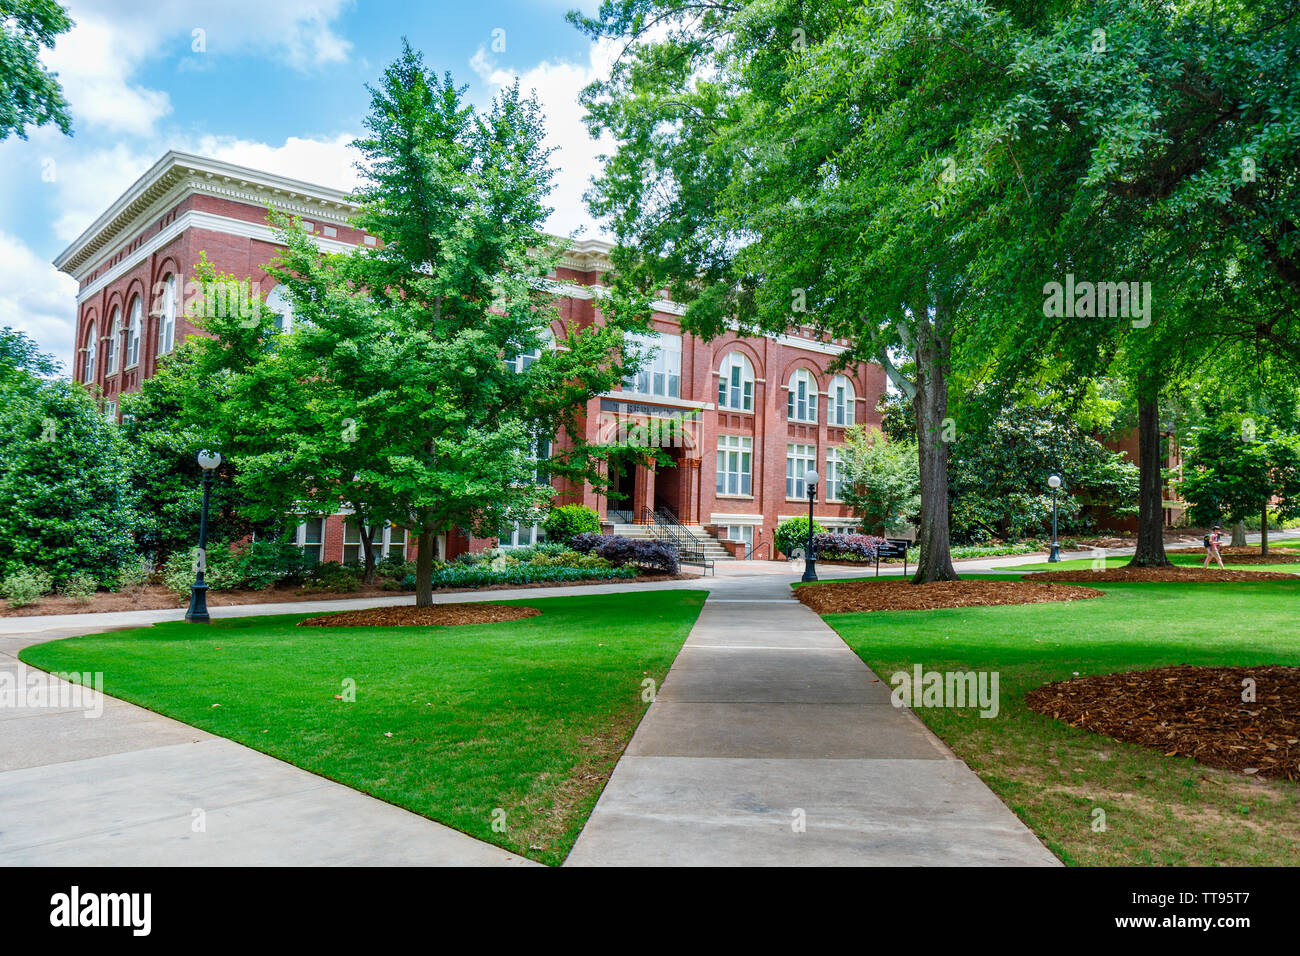 ATHENS, GA, USA - May 3: Terrell Hall on May 3, 2019 at the University of Georgia, North Campus in Athens, Georgia. Stock Photo